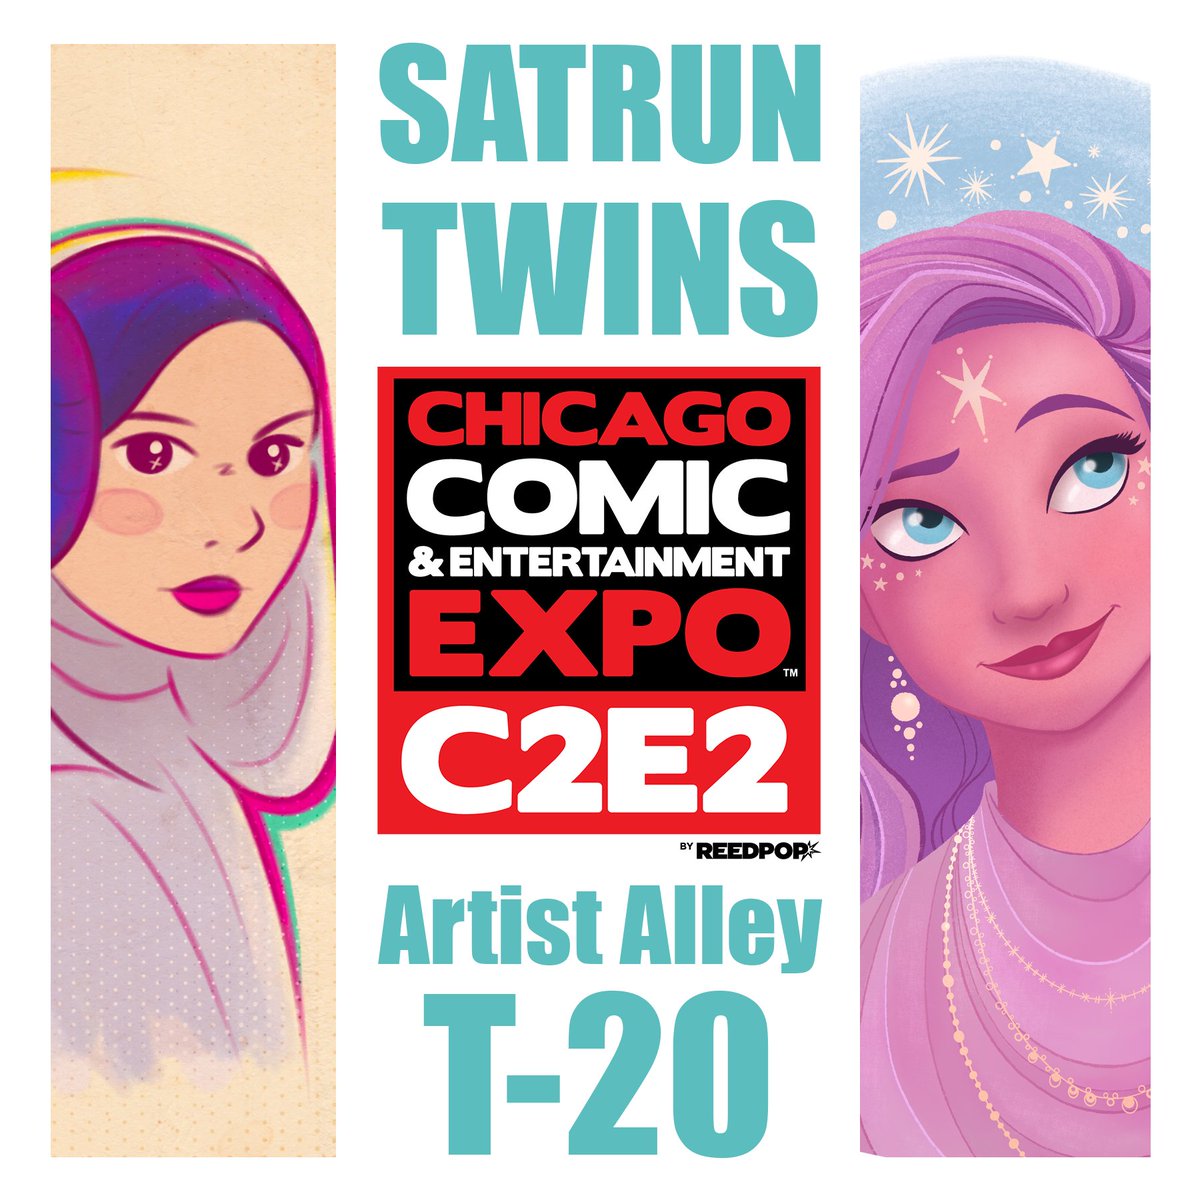 The best weekend of the year is fast approaching! This is Chicago Comic & Entertainment Expo's 15 year anniversary! If you're attending, please stop by and say hi to us in artist alley T-20. April 26-28 at McCormick Place #C2E2 #C2E22024 #artistalley